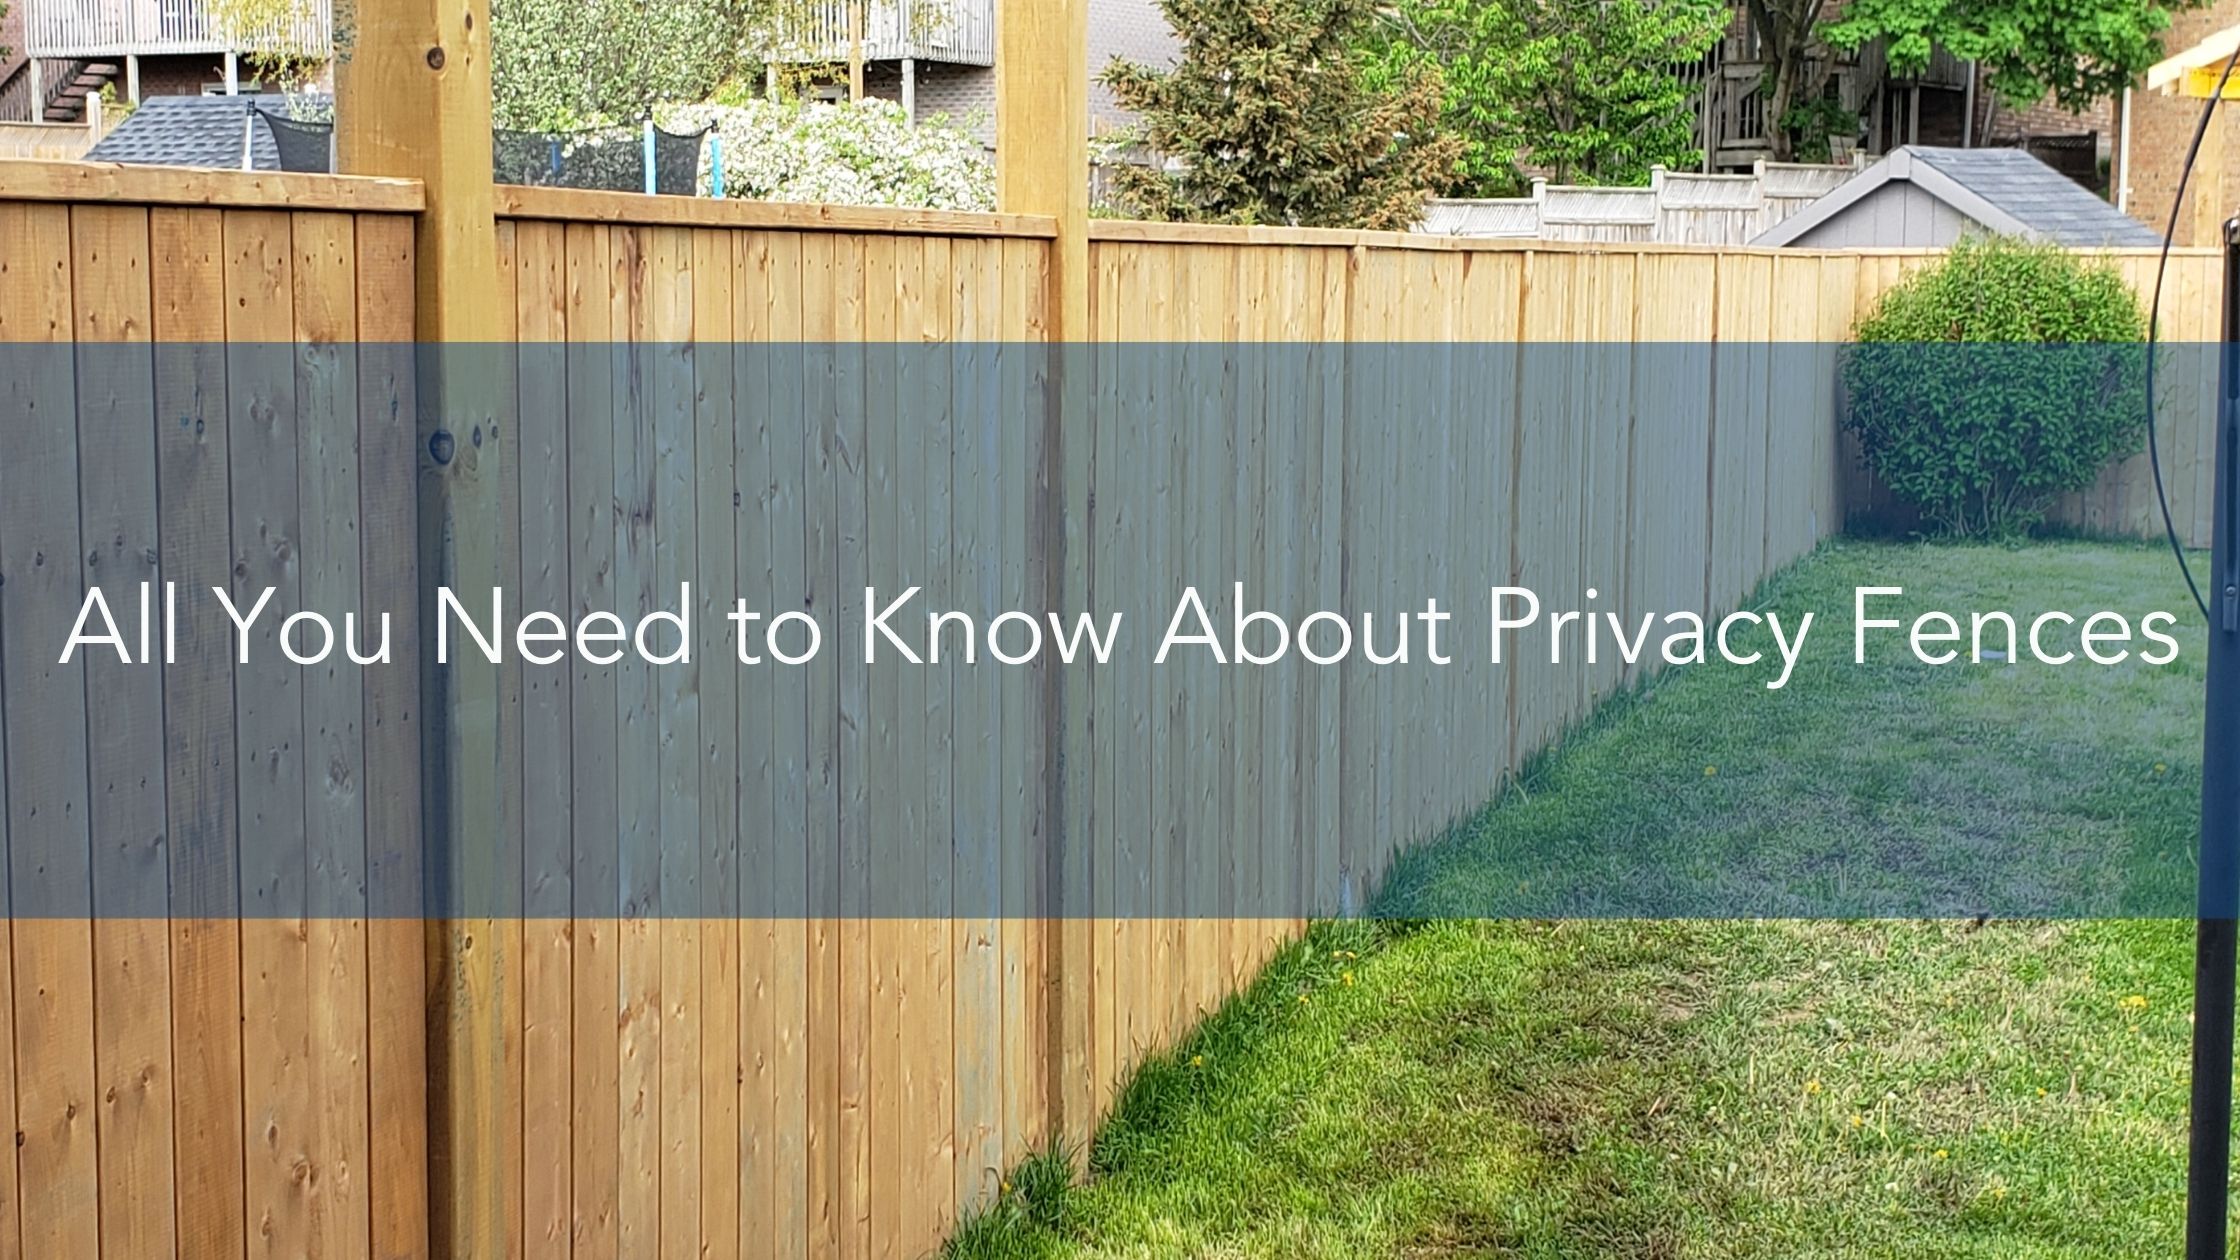 https://handymanconnection.com/wp-content/uploads/2022/06/All-You-Need-to-Know-About-Privacy-Fences.jpg